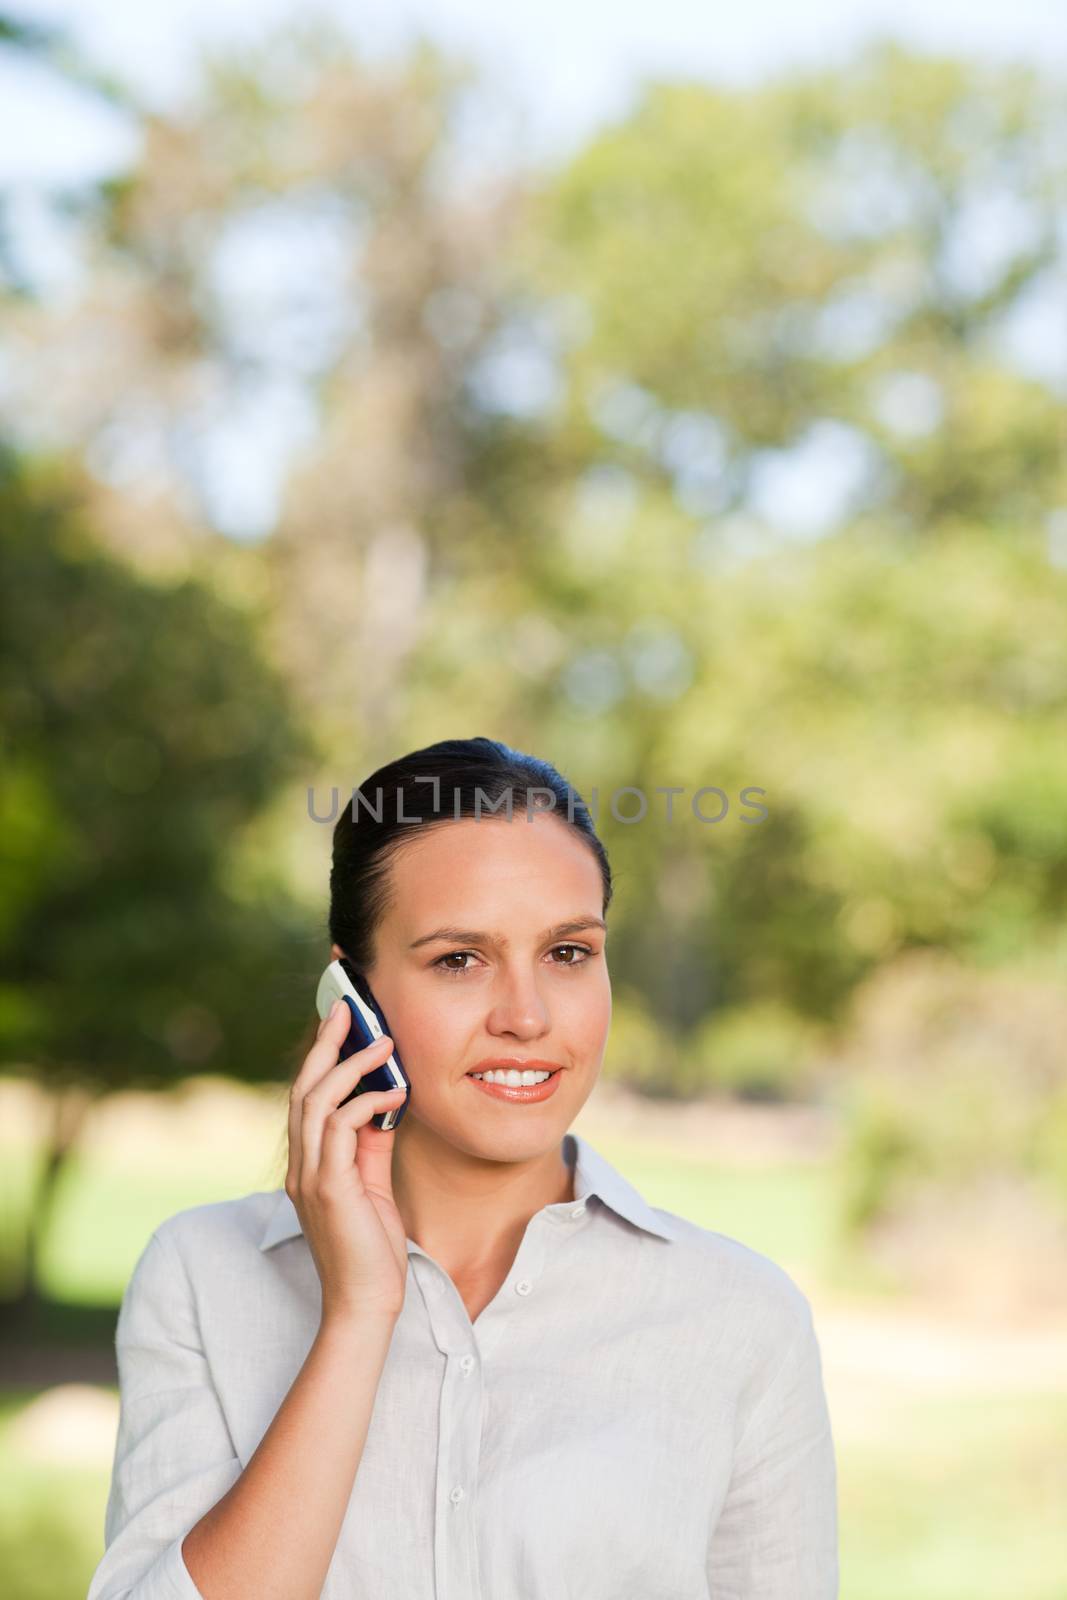 Woman phoning in the park during the summer